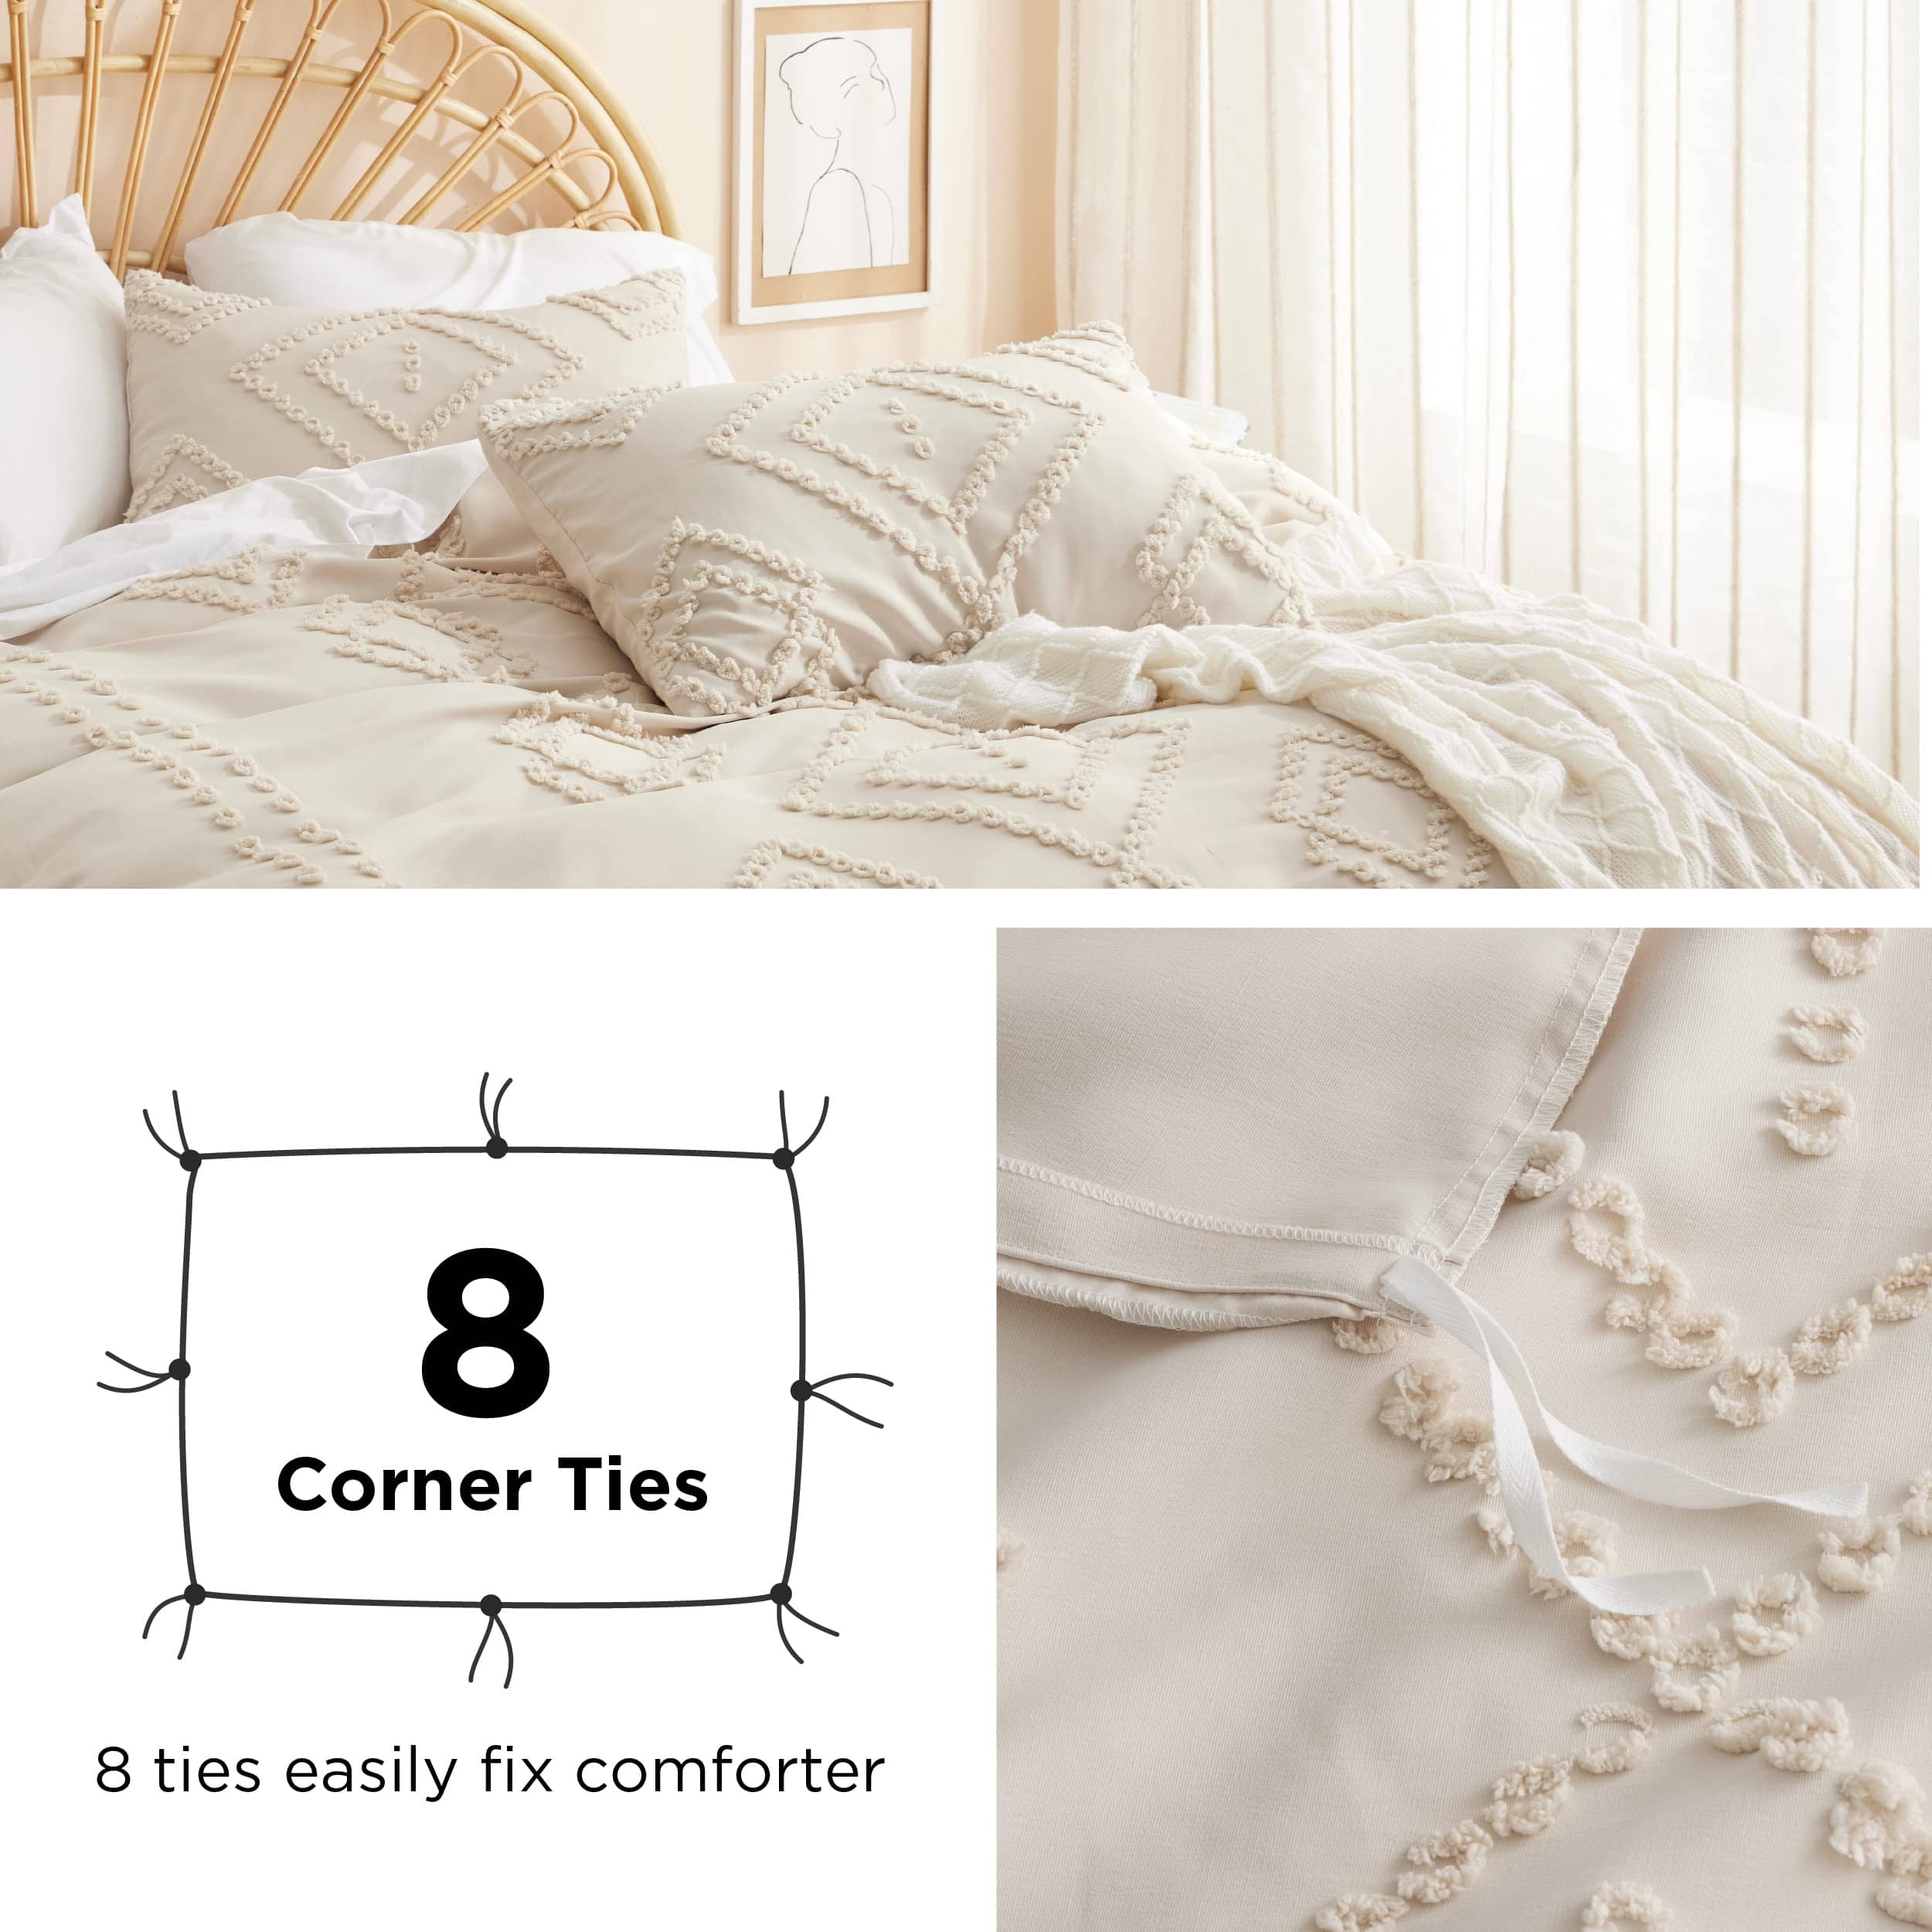 Striped Tufted Embroidery Duvet Cover Set